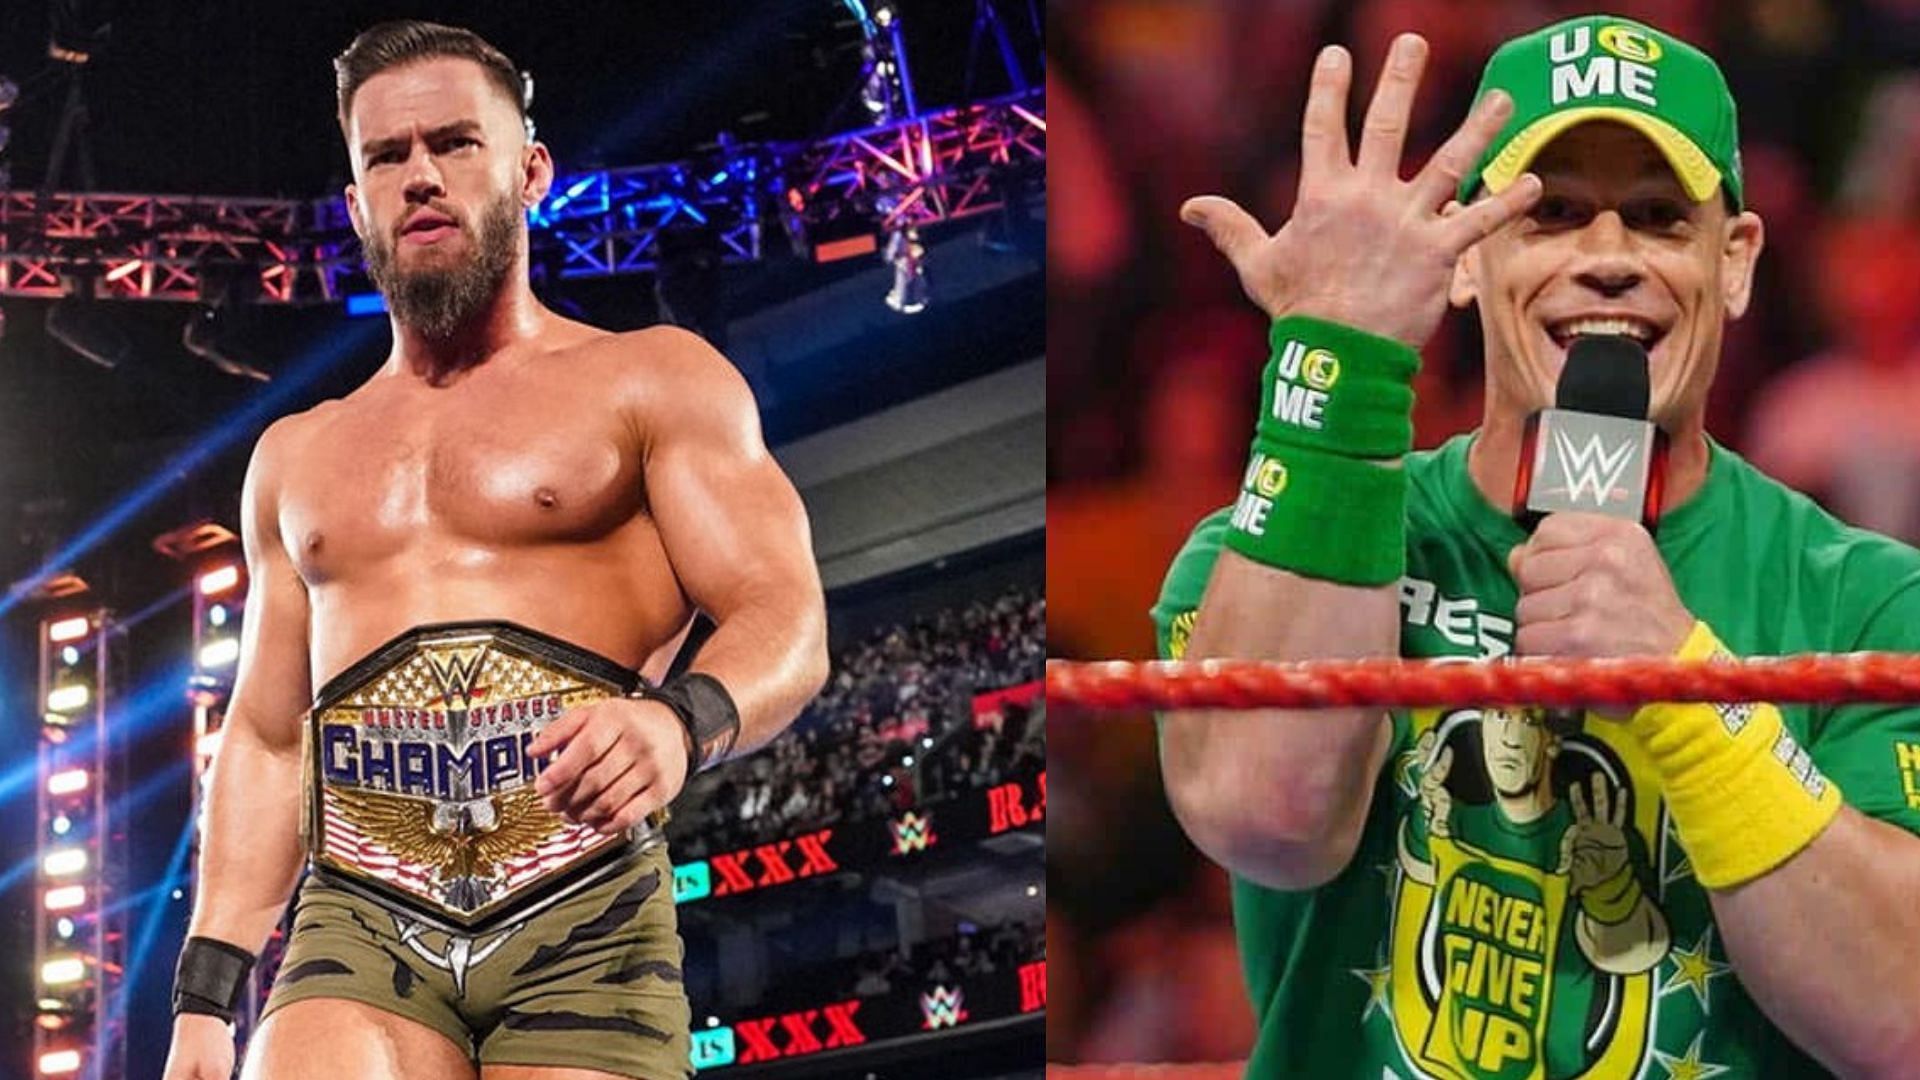 The Forever Champ might be wrestling The Champ at WrestleMania.